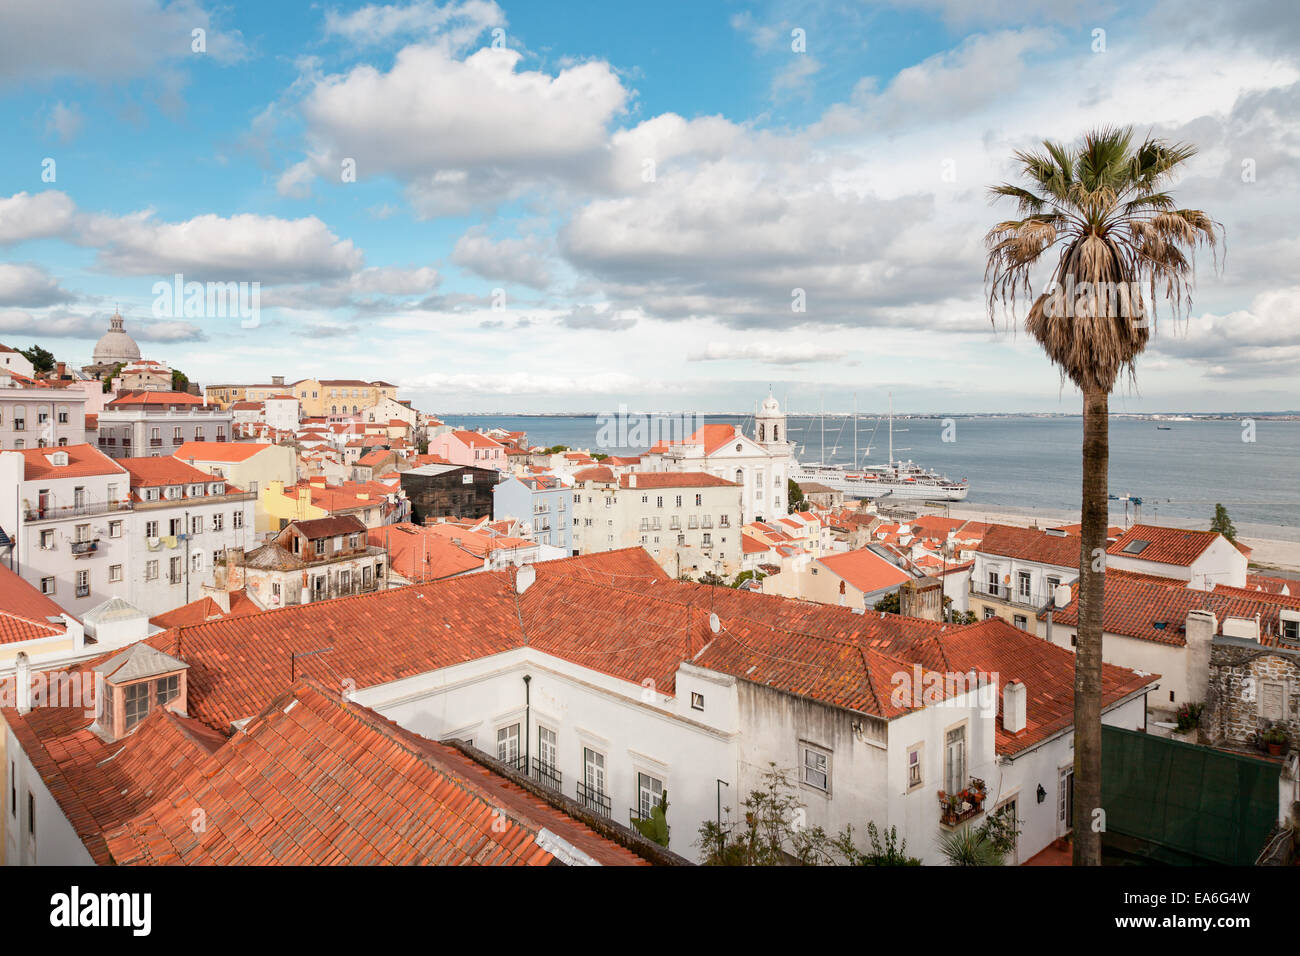 Portugal, Lisbon, View over old town Stock Photo